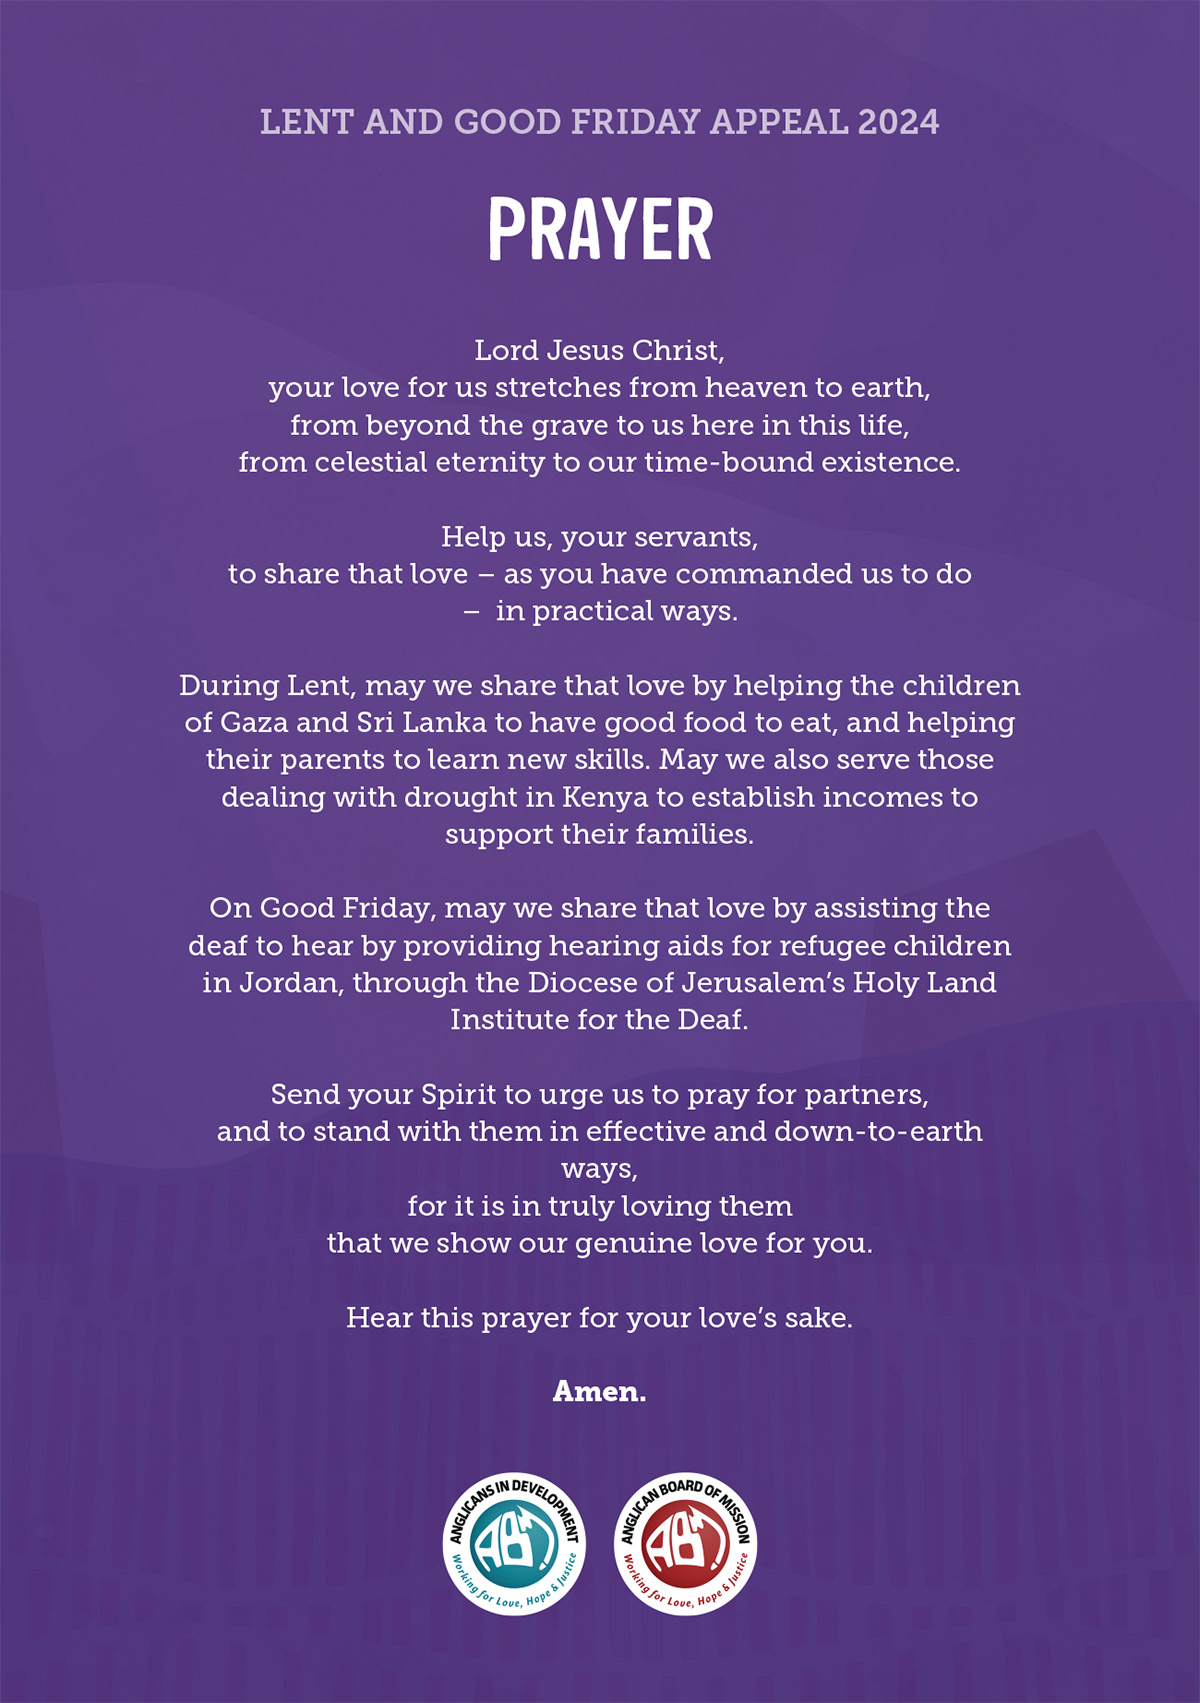 Lent and Good Friday Appeal Prayer 2024